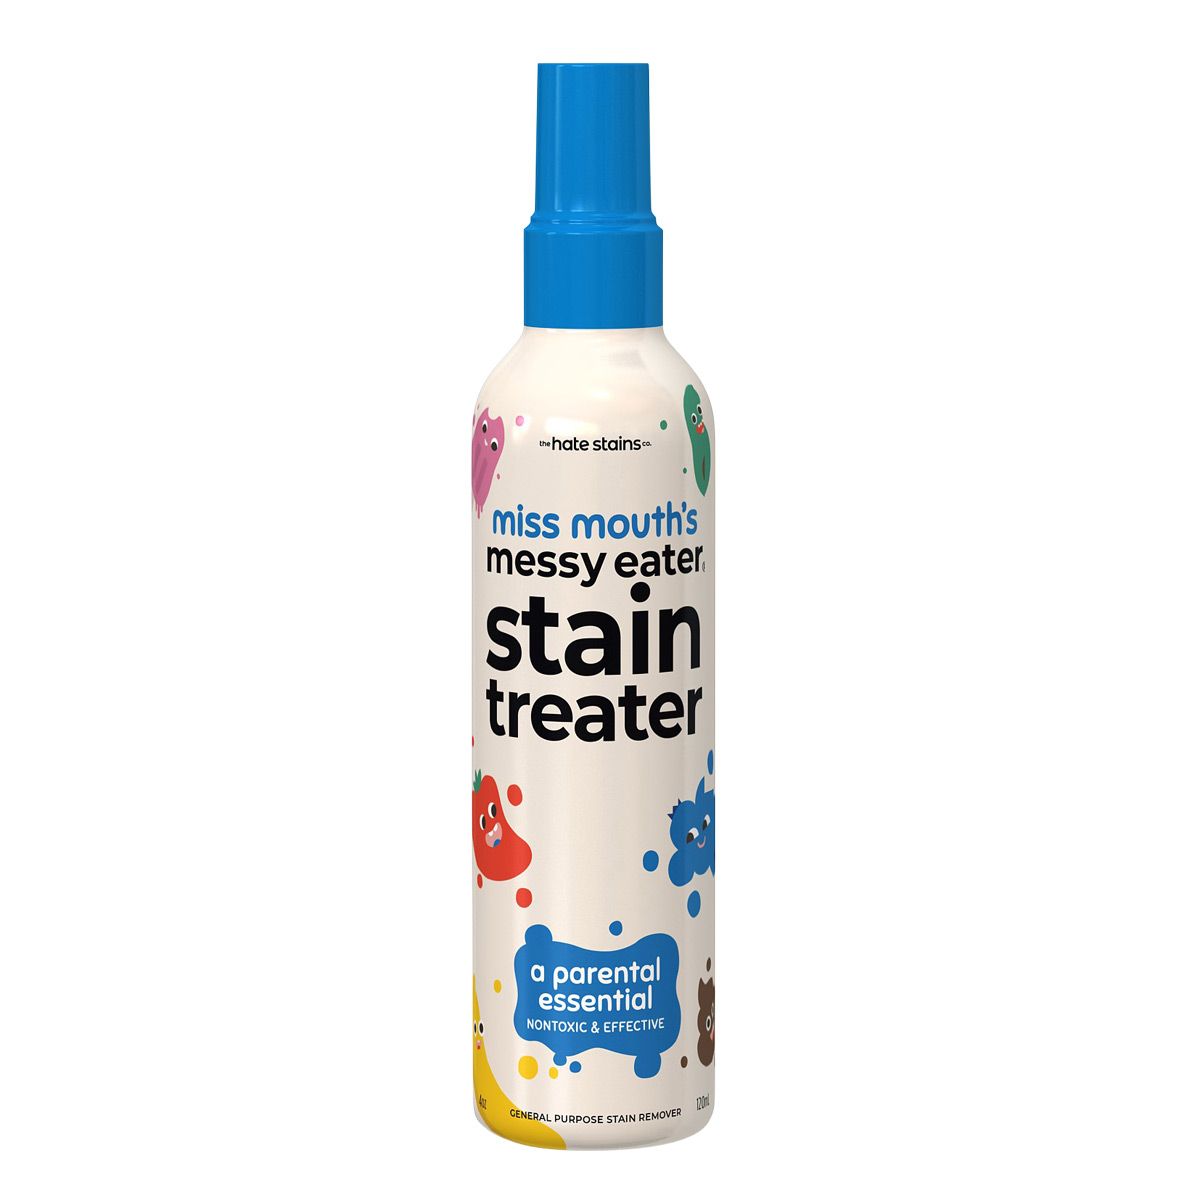 Messy Eater 4oz Stain Treater | The Container Store